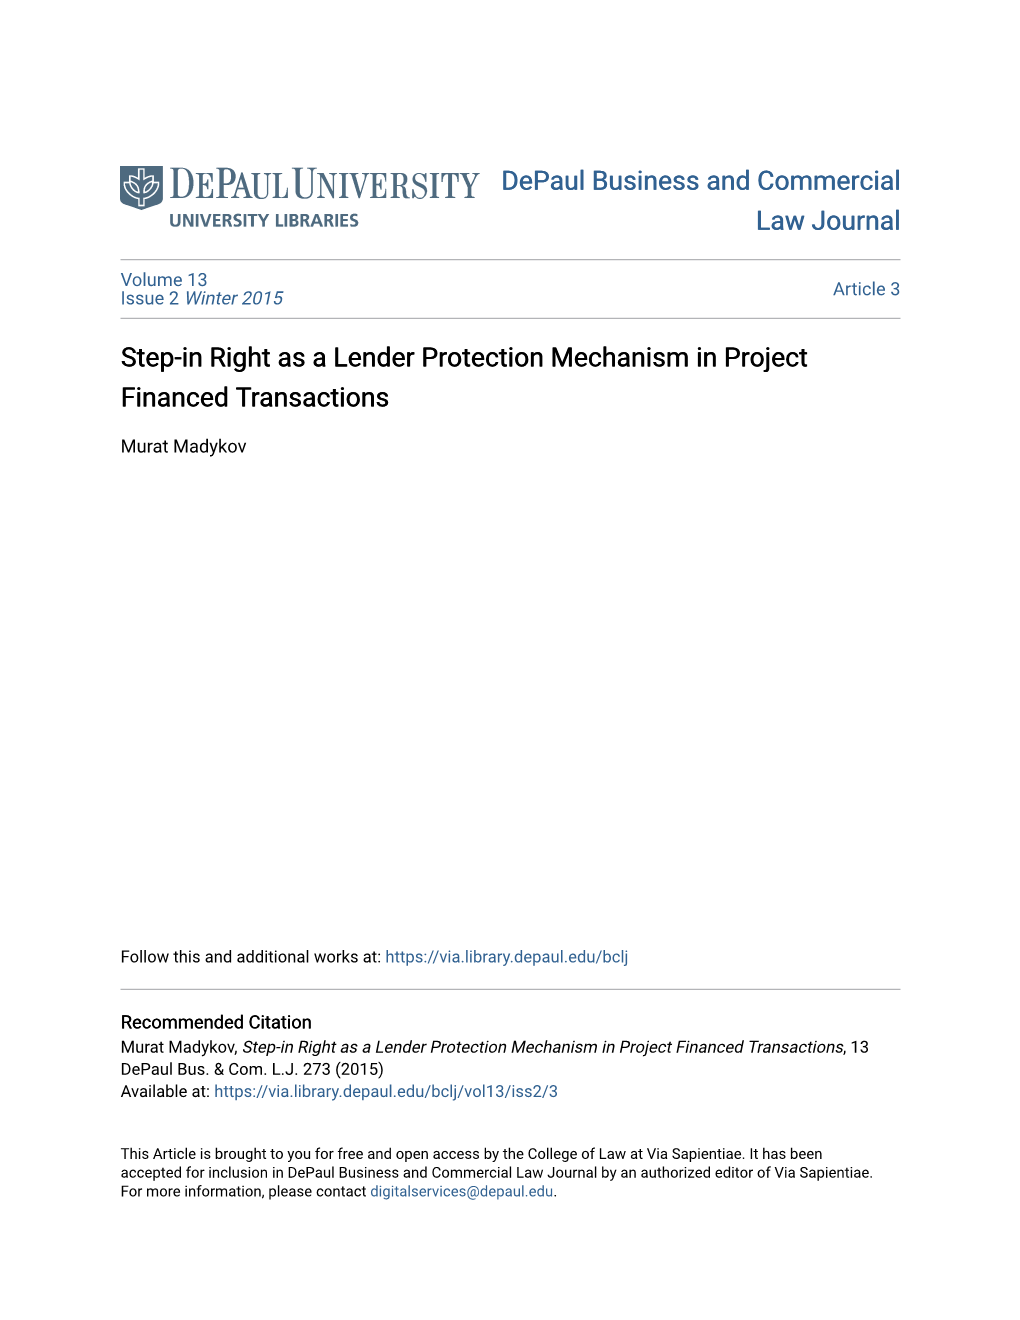 Step-In Right As a Lender Protection Mechanism in Project Financed Transactions